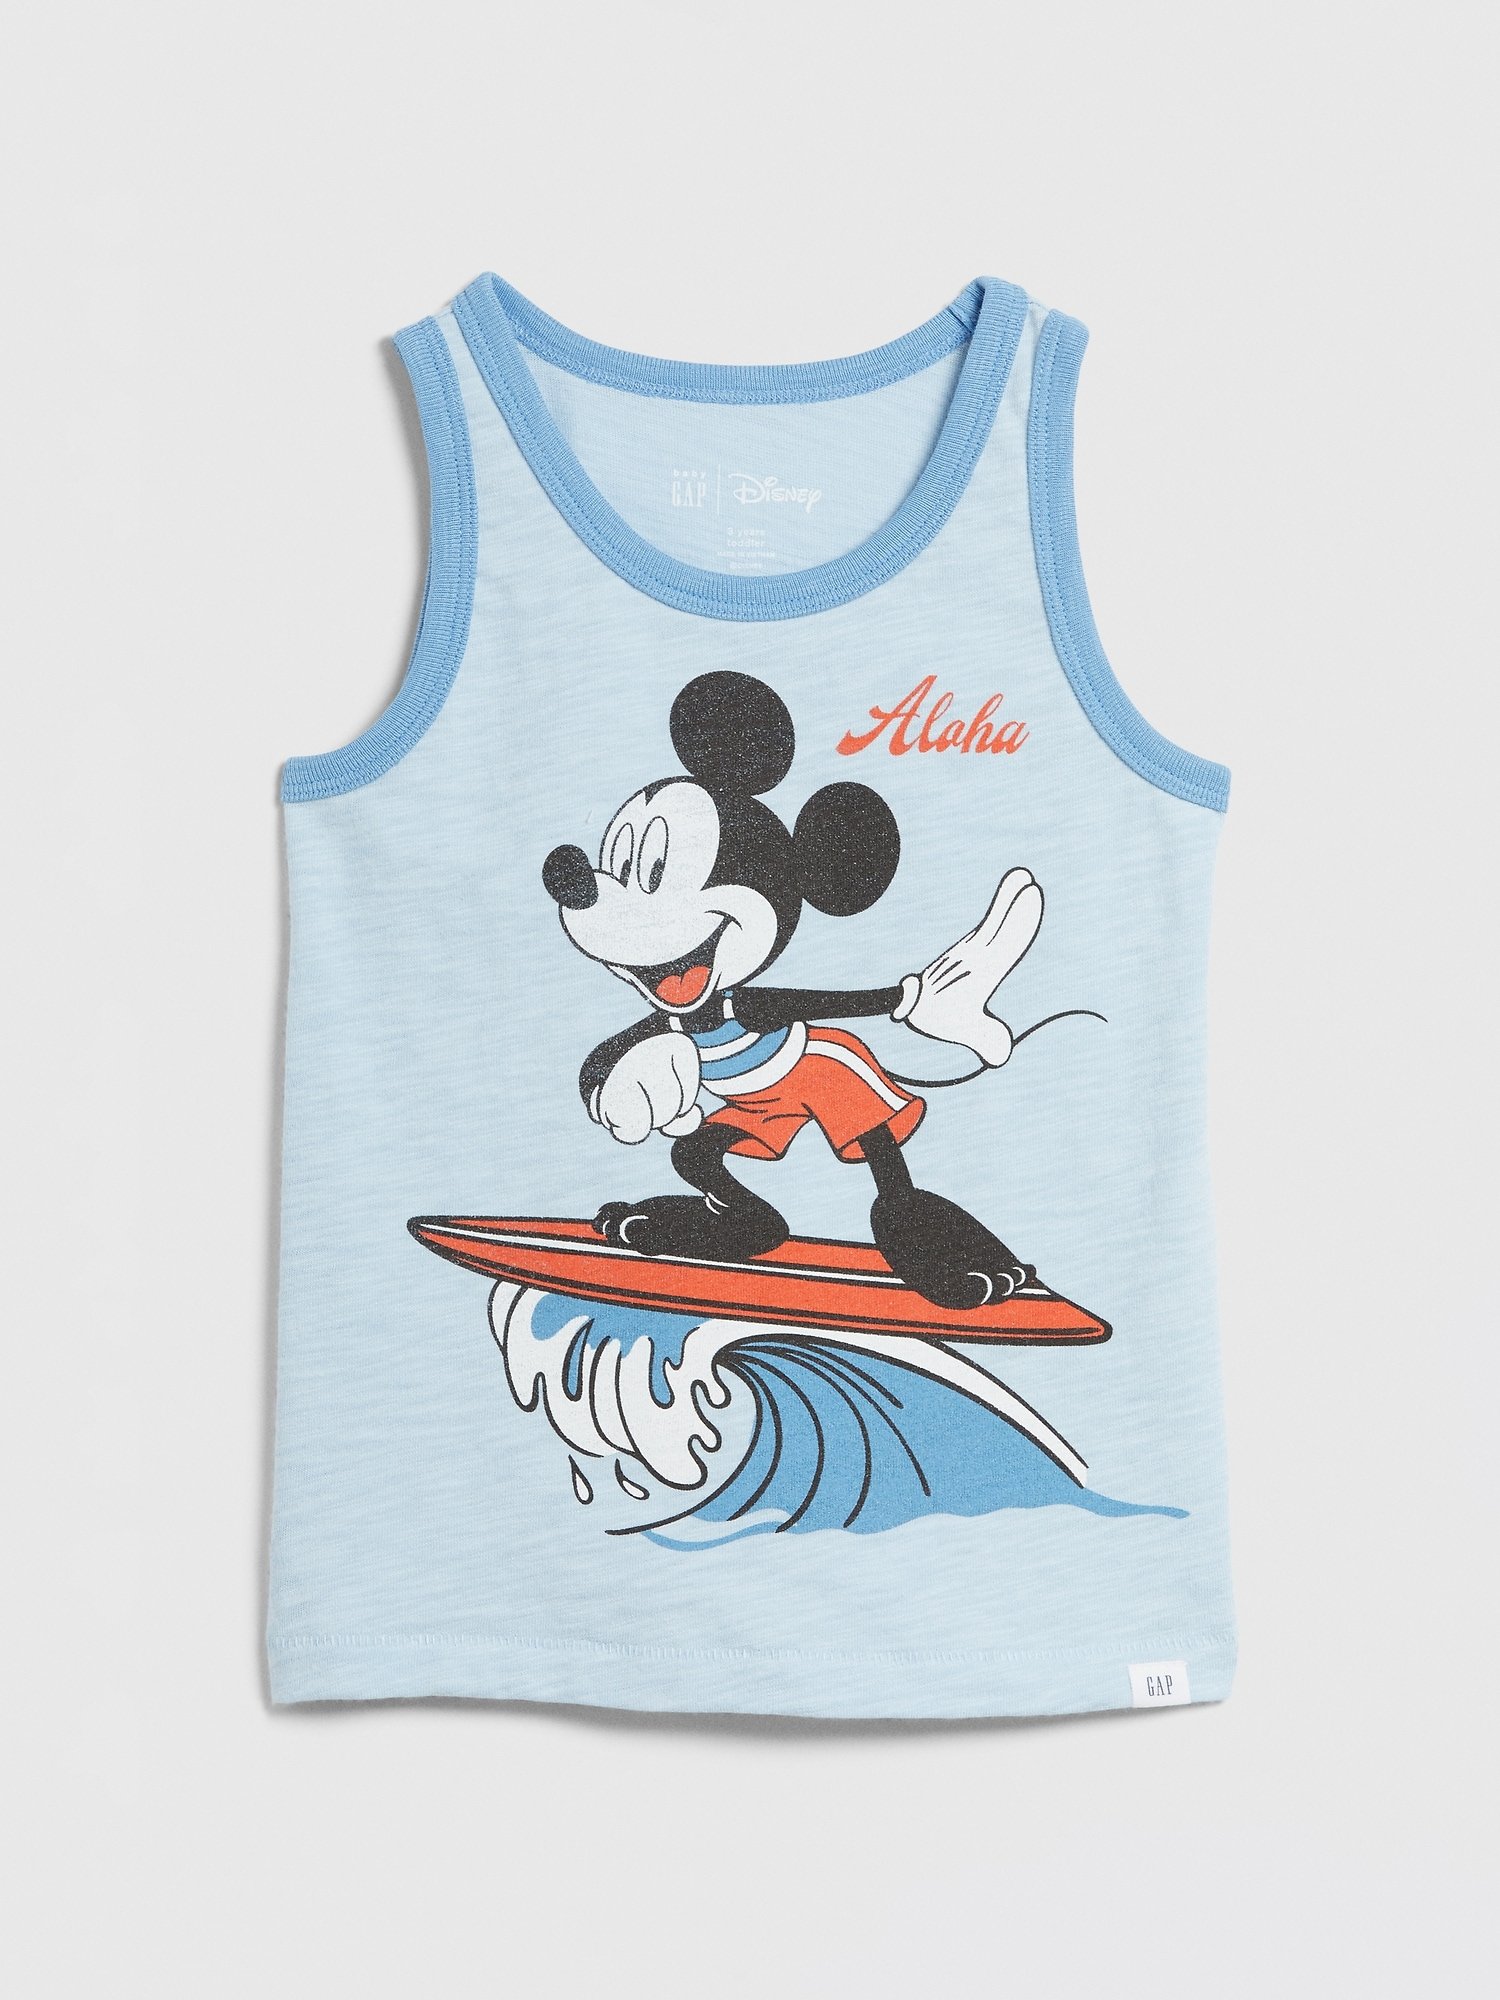 Disney Mickey Mouse Atlet product image